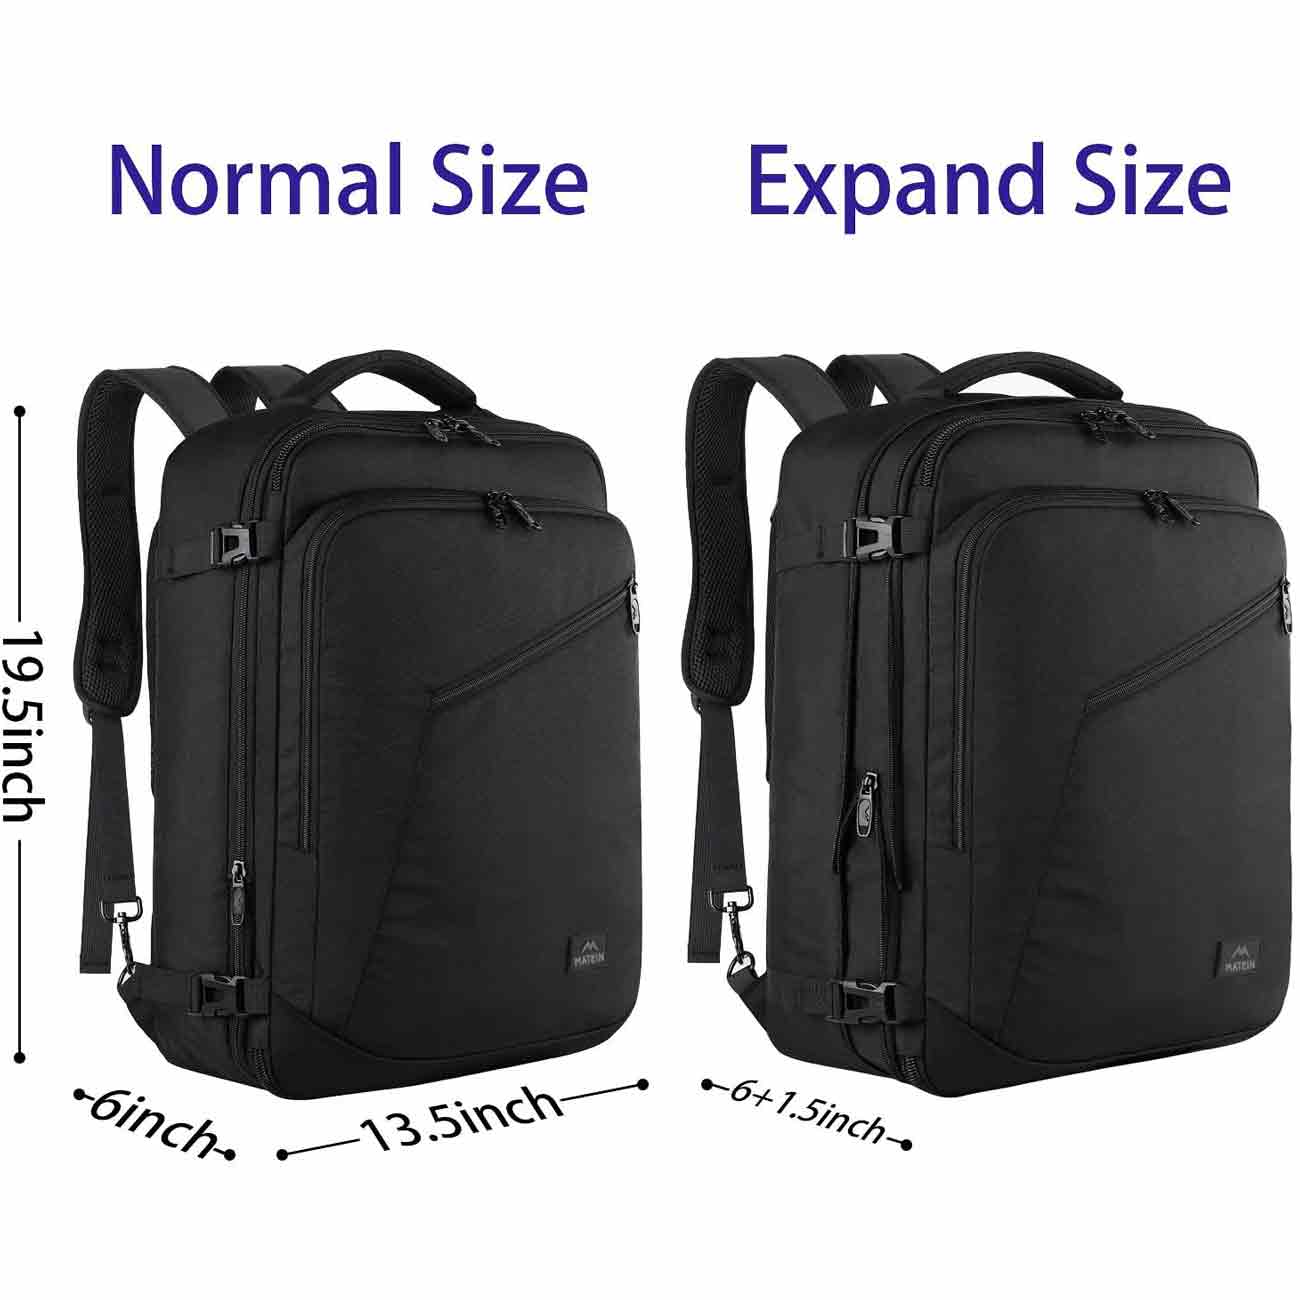 Matein Carry on Backpack, Extra Large Travel Backpack Expandable Airplane Approved Weekender Bag for Men & Women, Water Resistant Lightweight